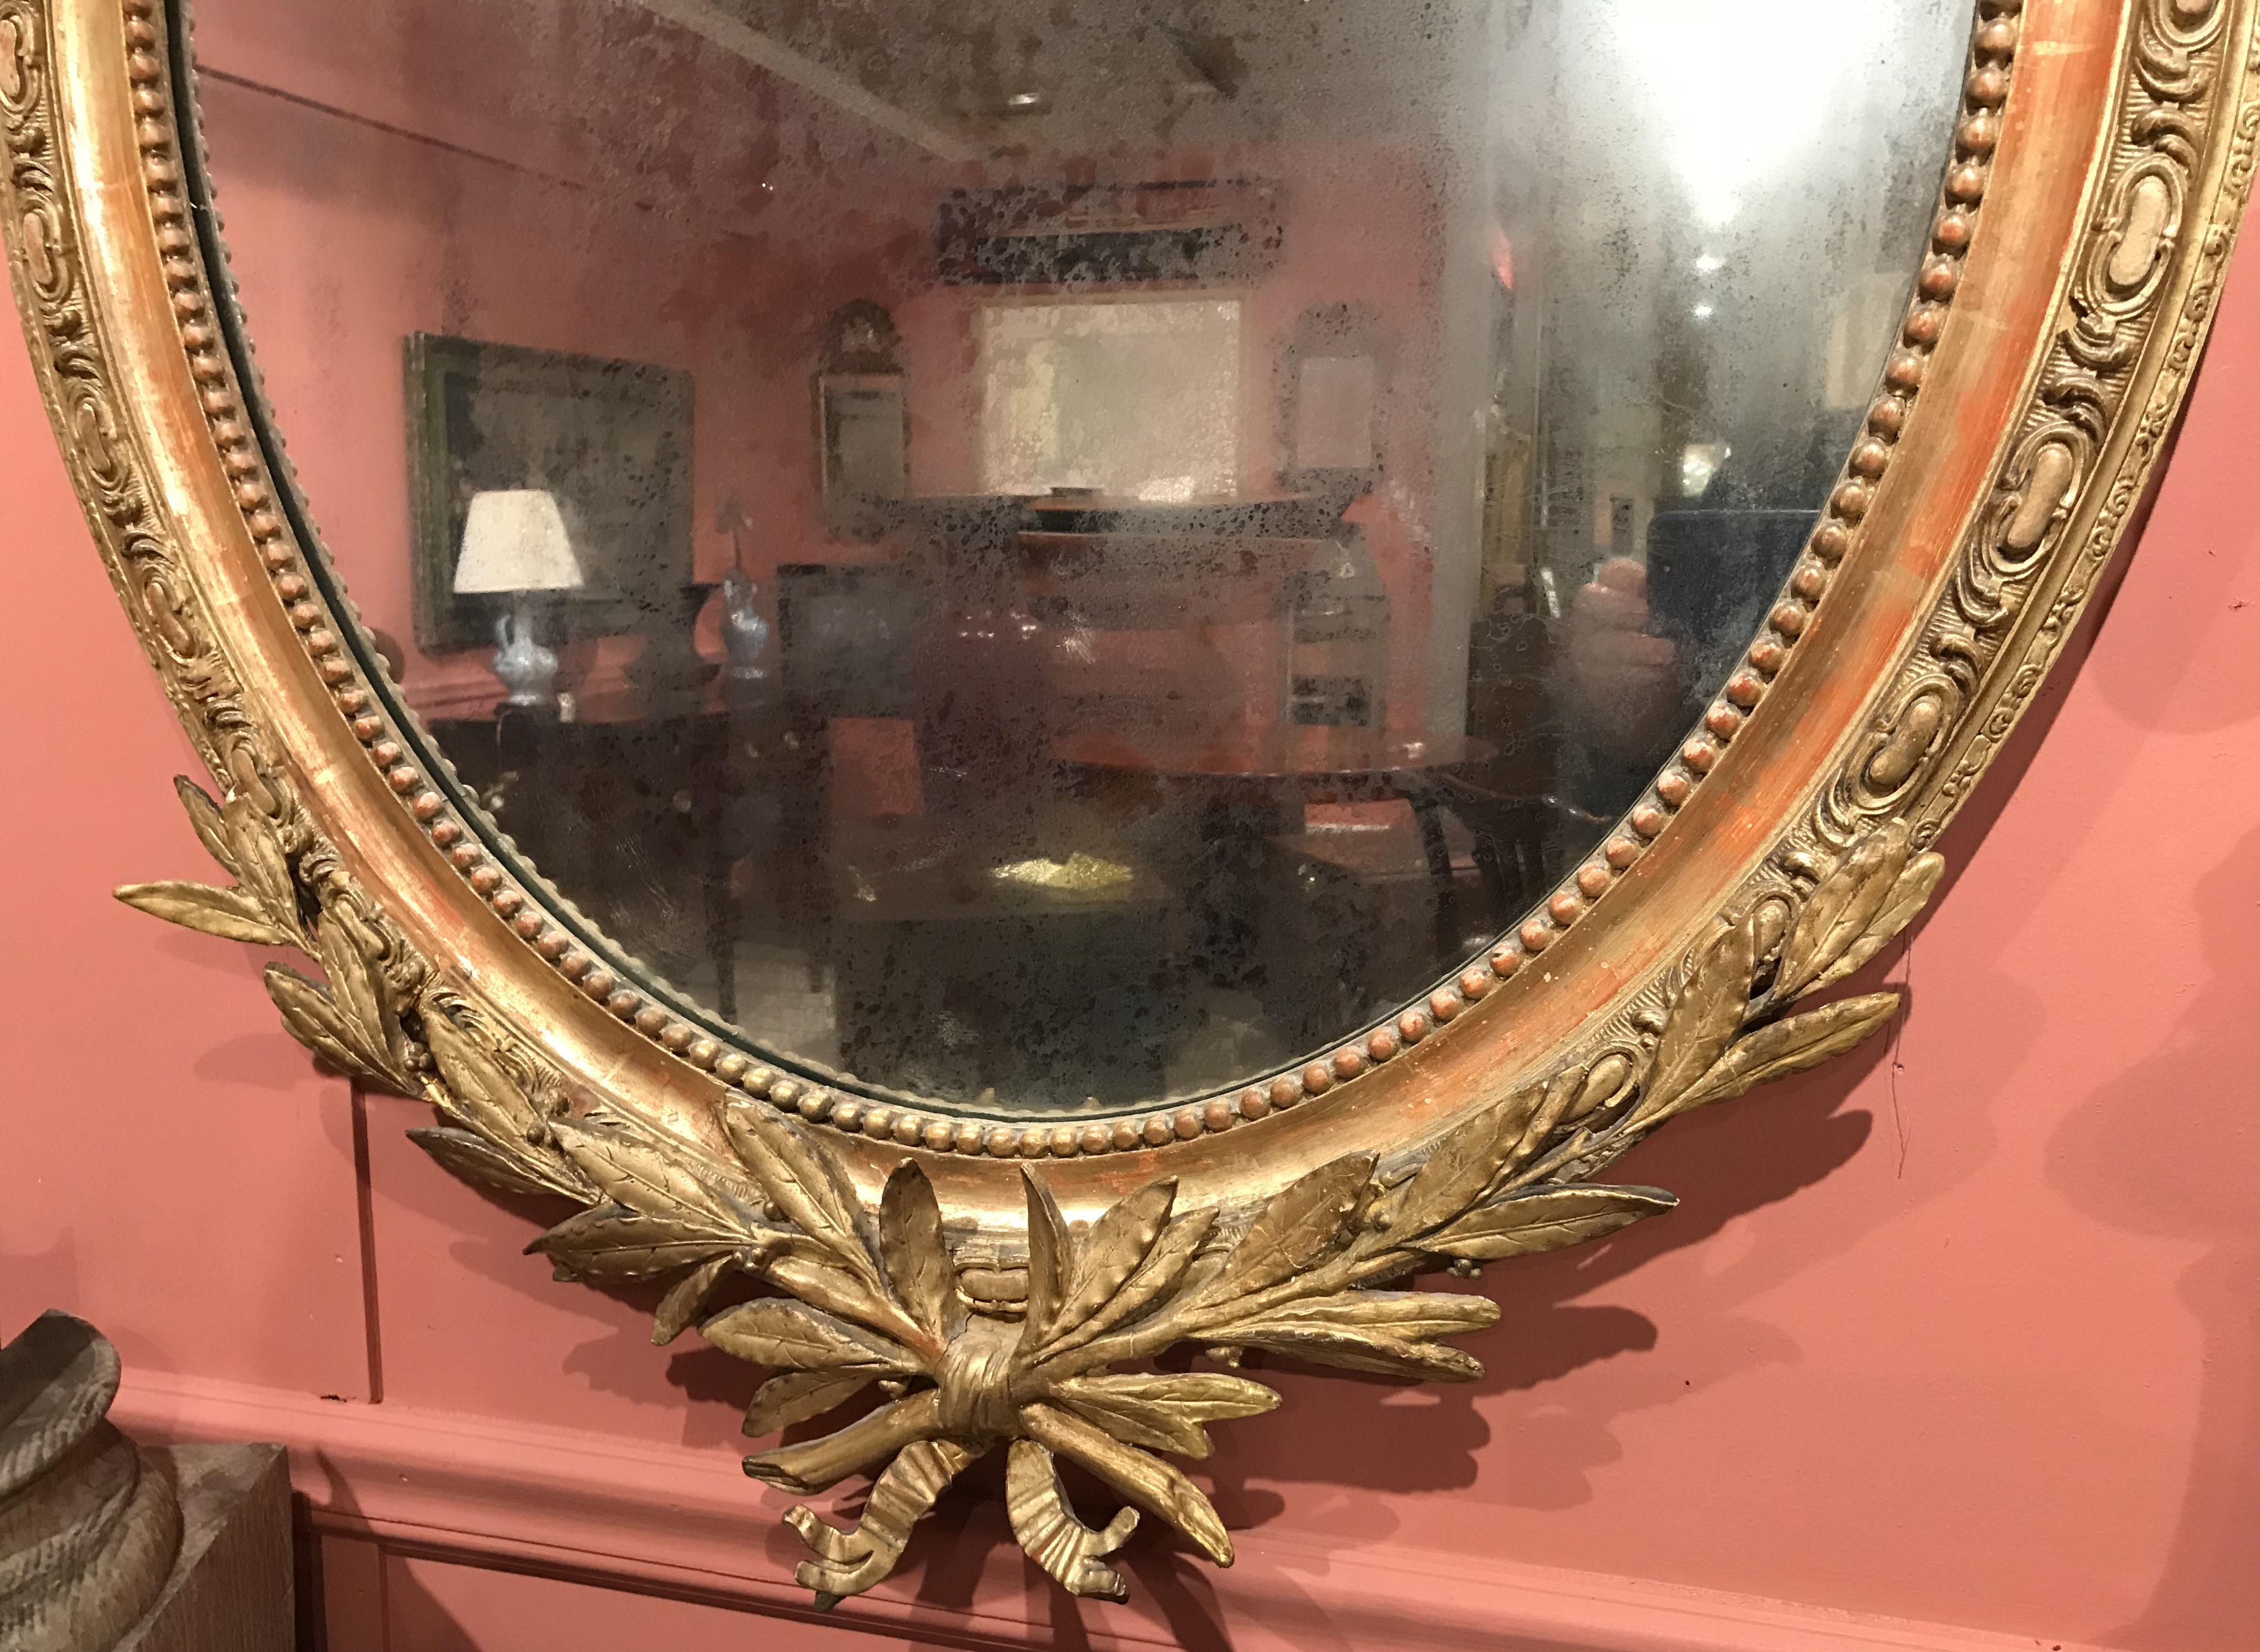 French Provincial French Gilt Foliate Decorated Oval Wall Mirror, Early 19th Century